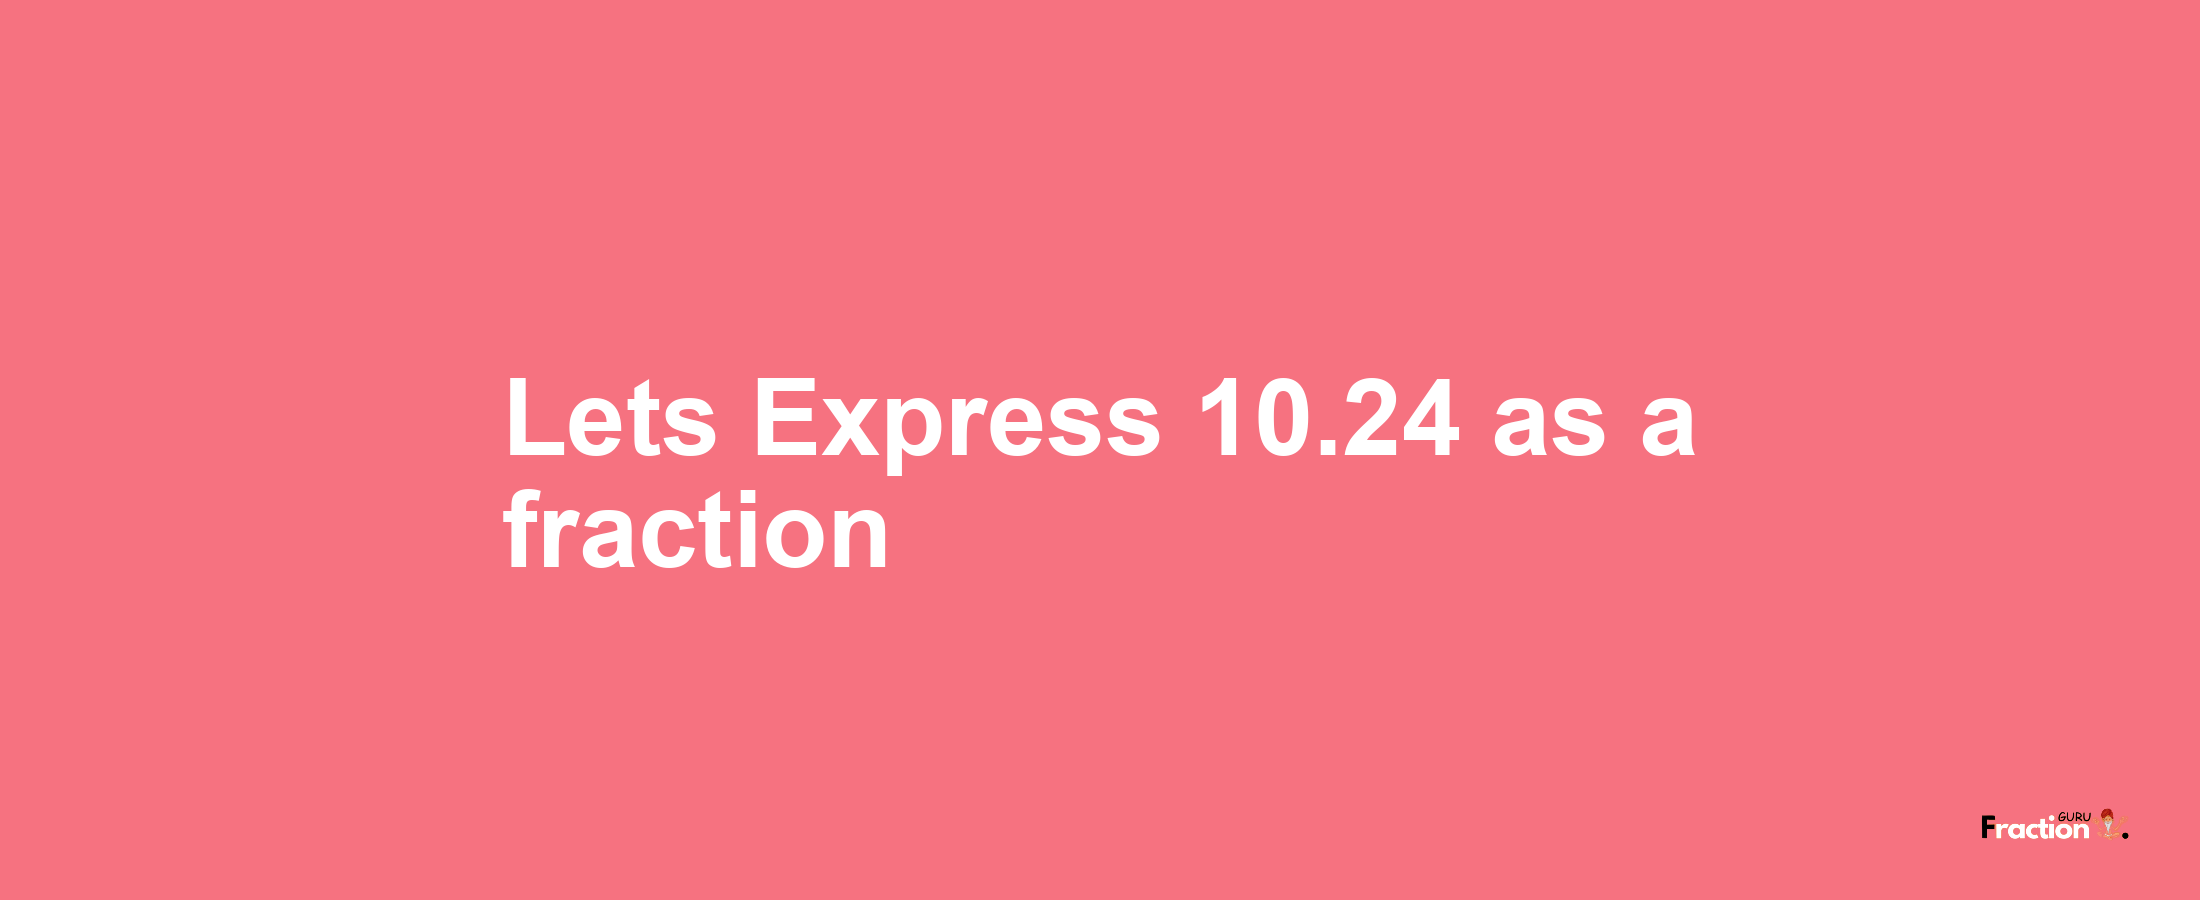 Lets Express 10.24 as afraction